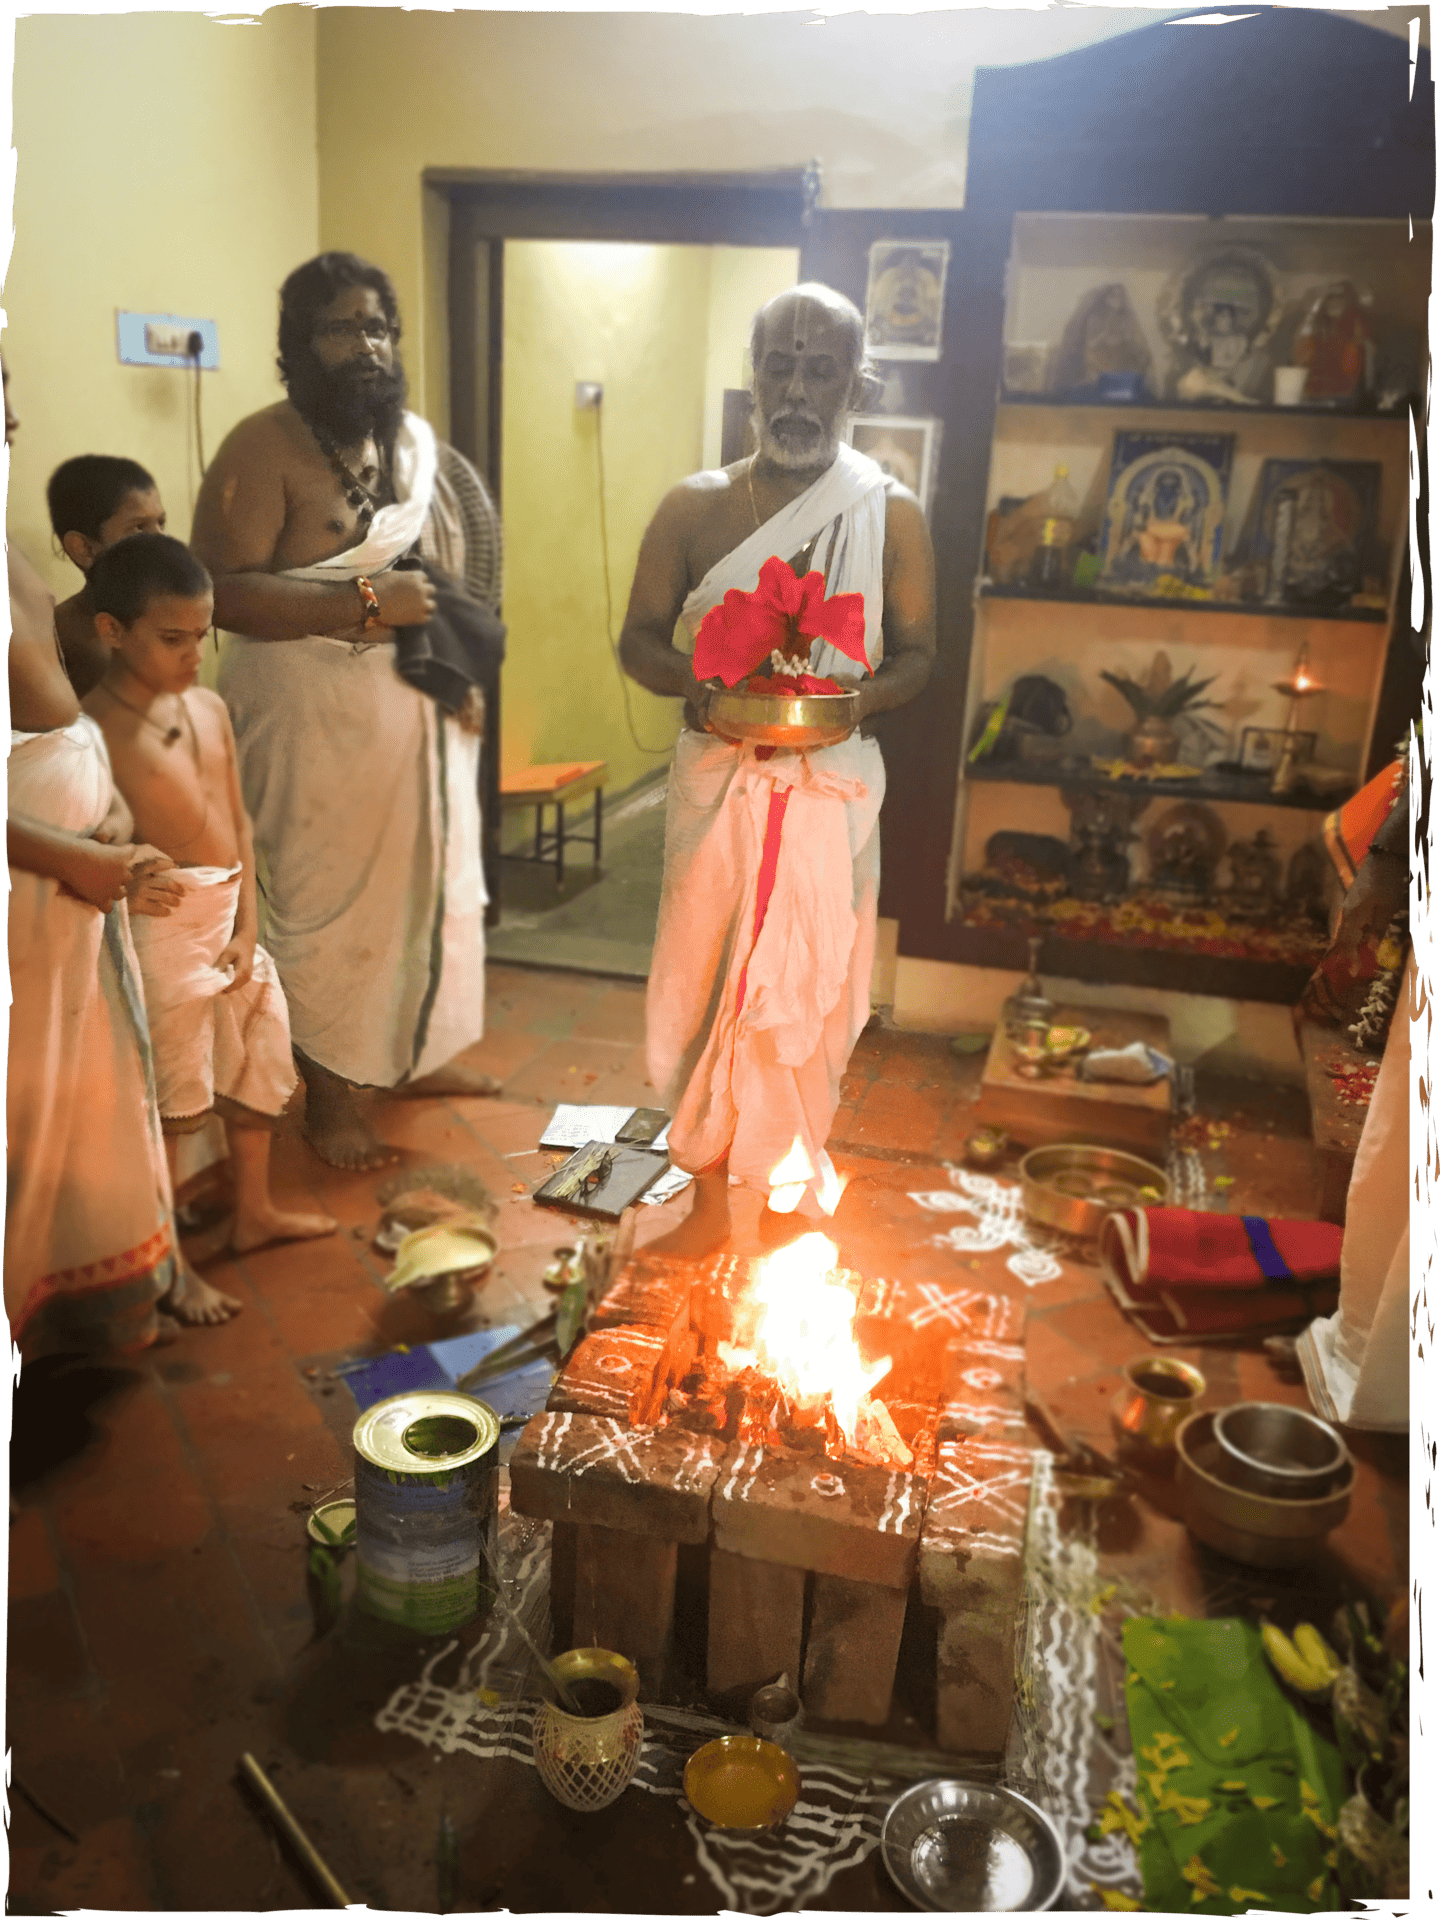 Image of a Vedic ritual being performed.